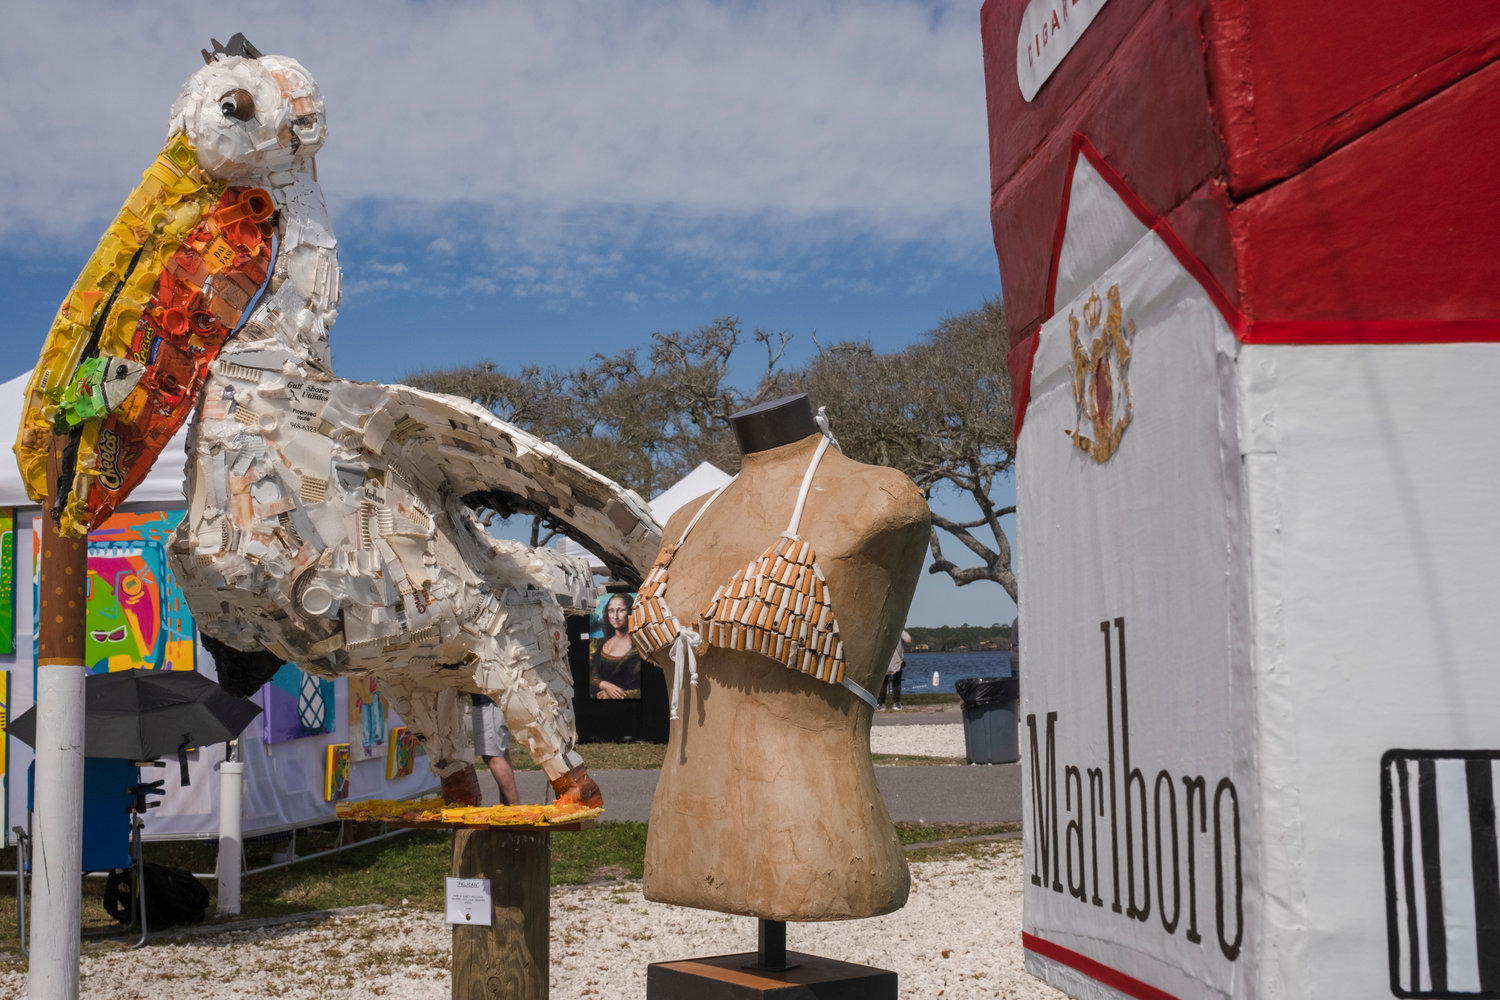 MICAH GREEN / GULF COAST MEDIA

JD Swiger and Swiger Studio’s sculptures made from recycled, found and collected material at his booth at Ballyhoo Festival at Gulf State Park on Saturday.